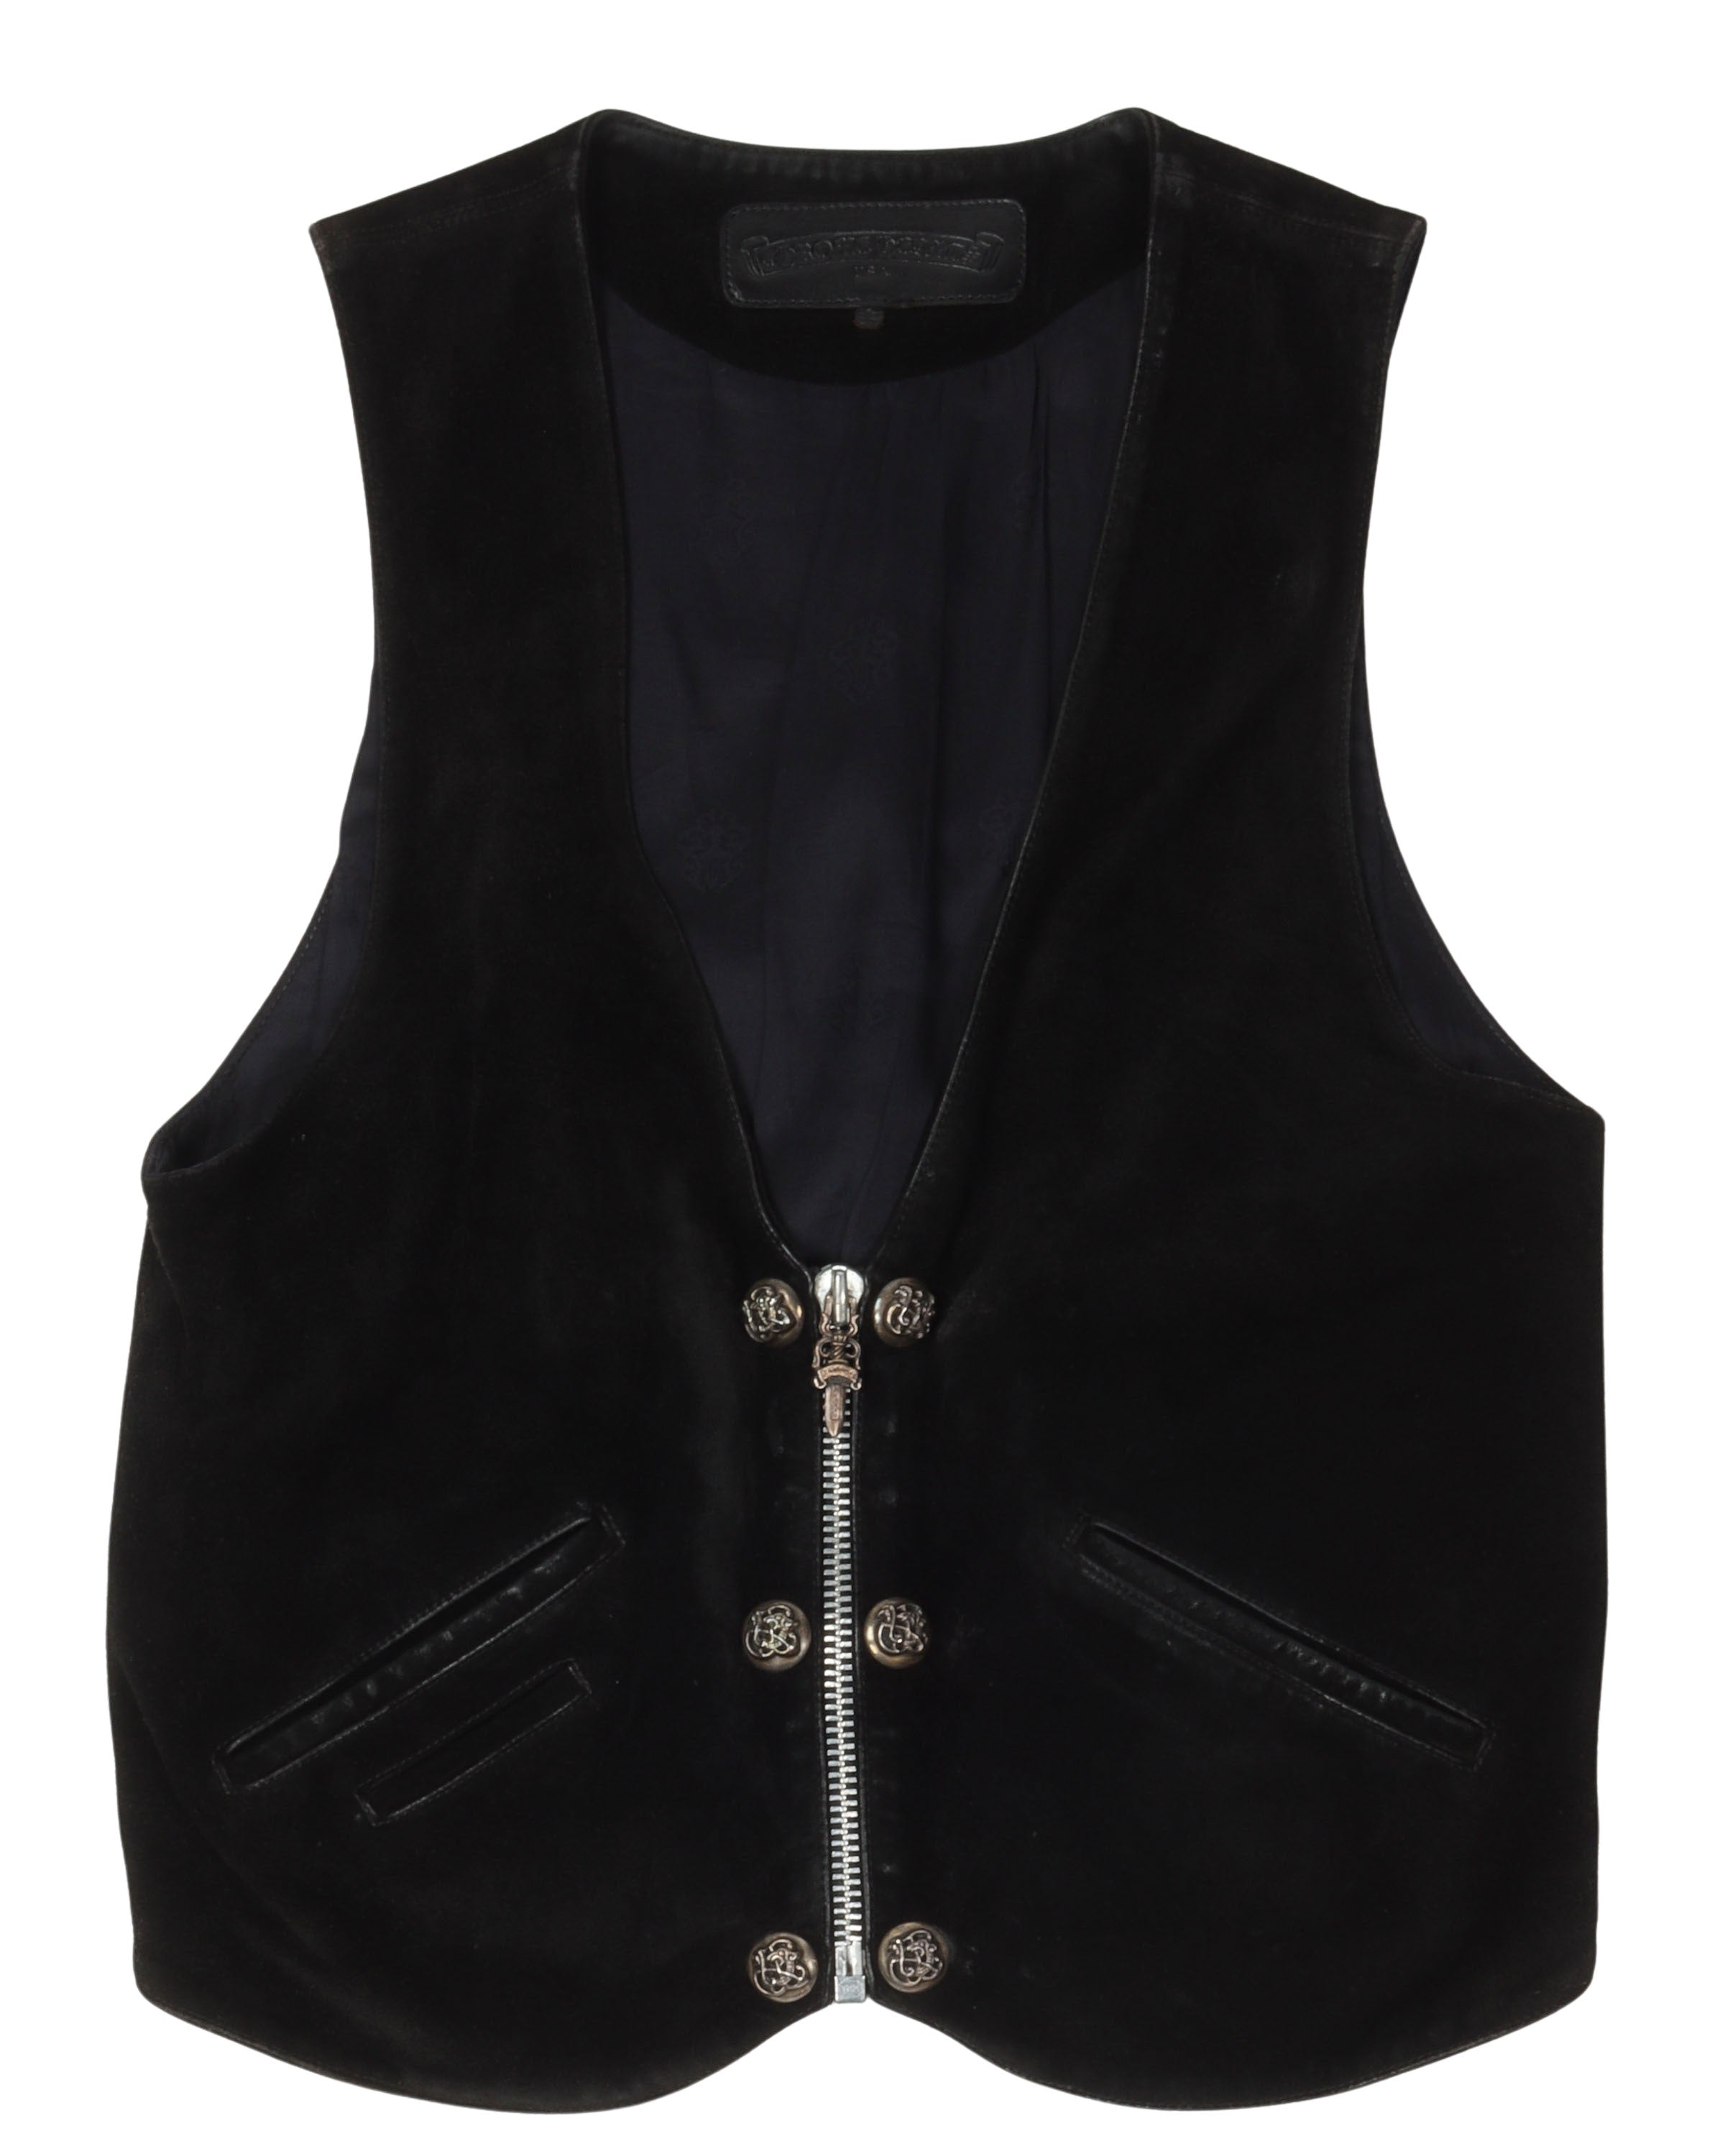 Chrome Hearts Suede Leather Vest